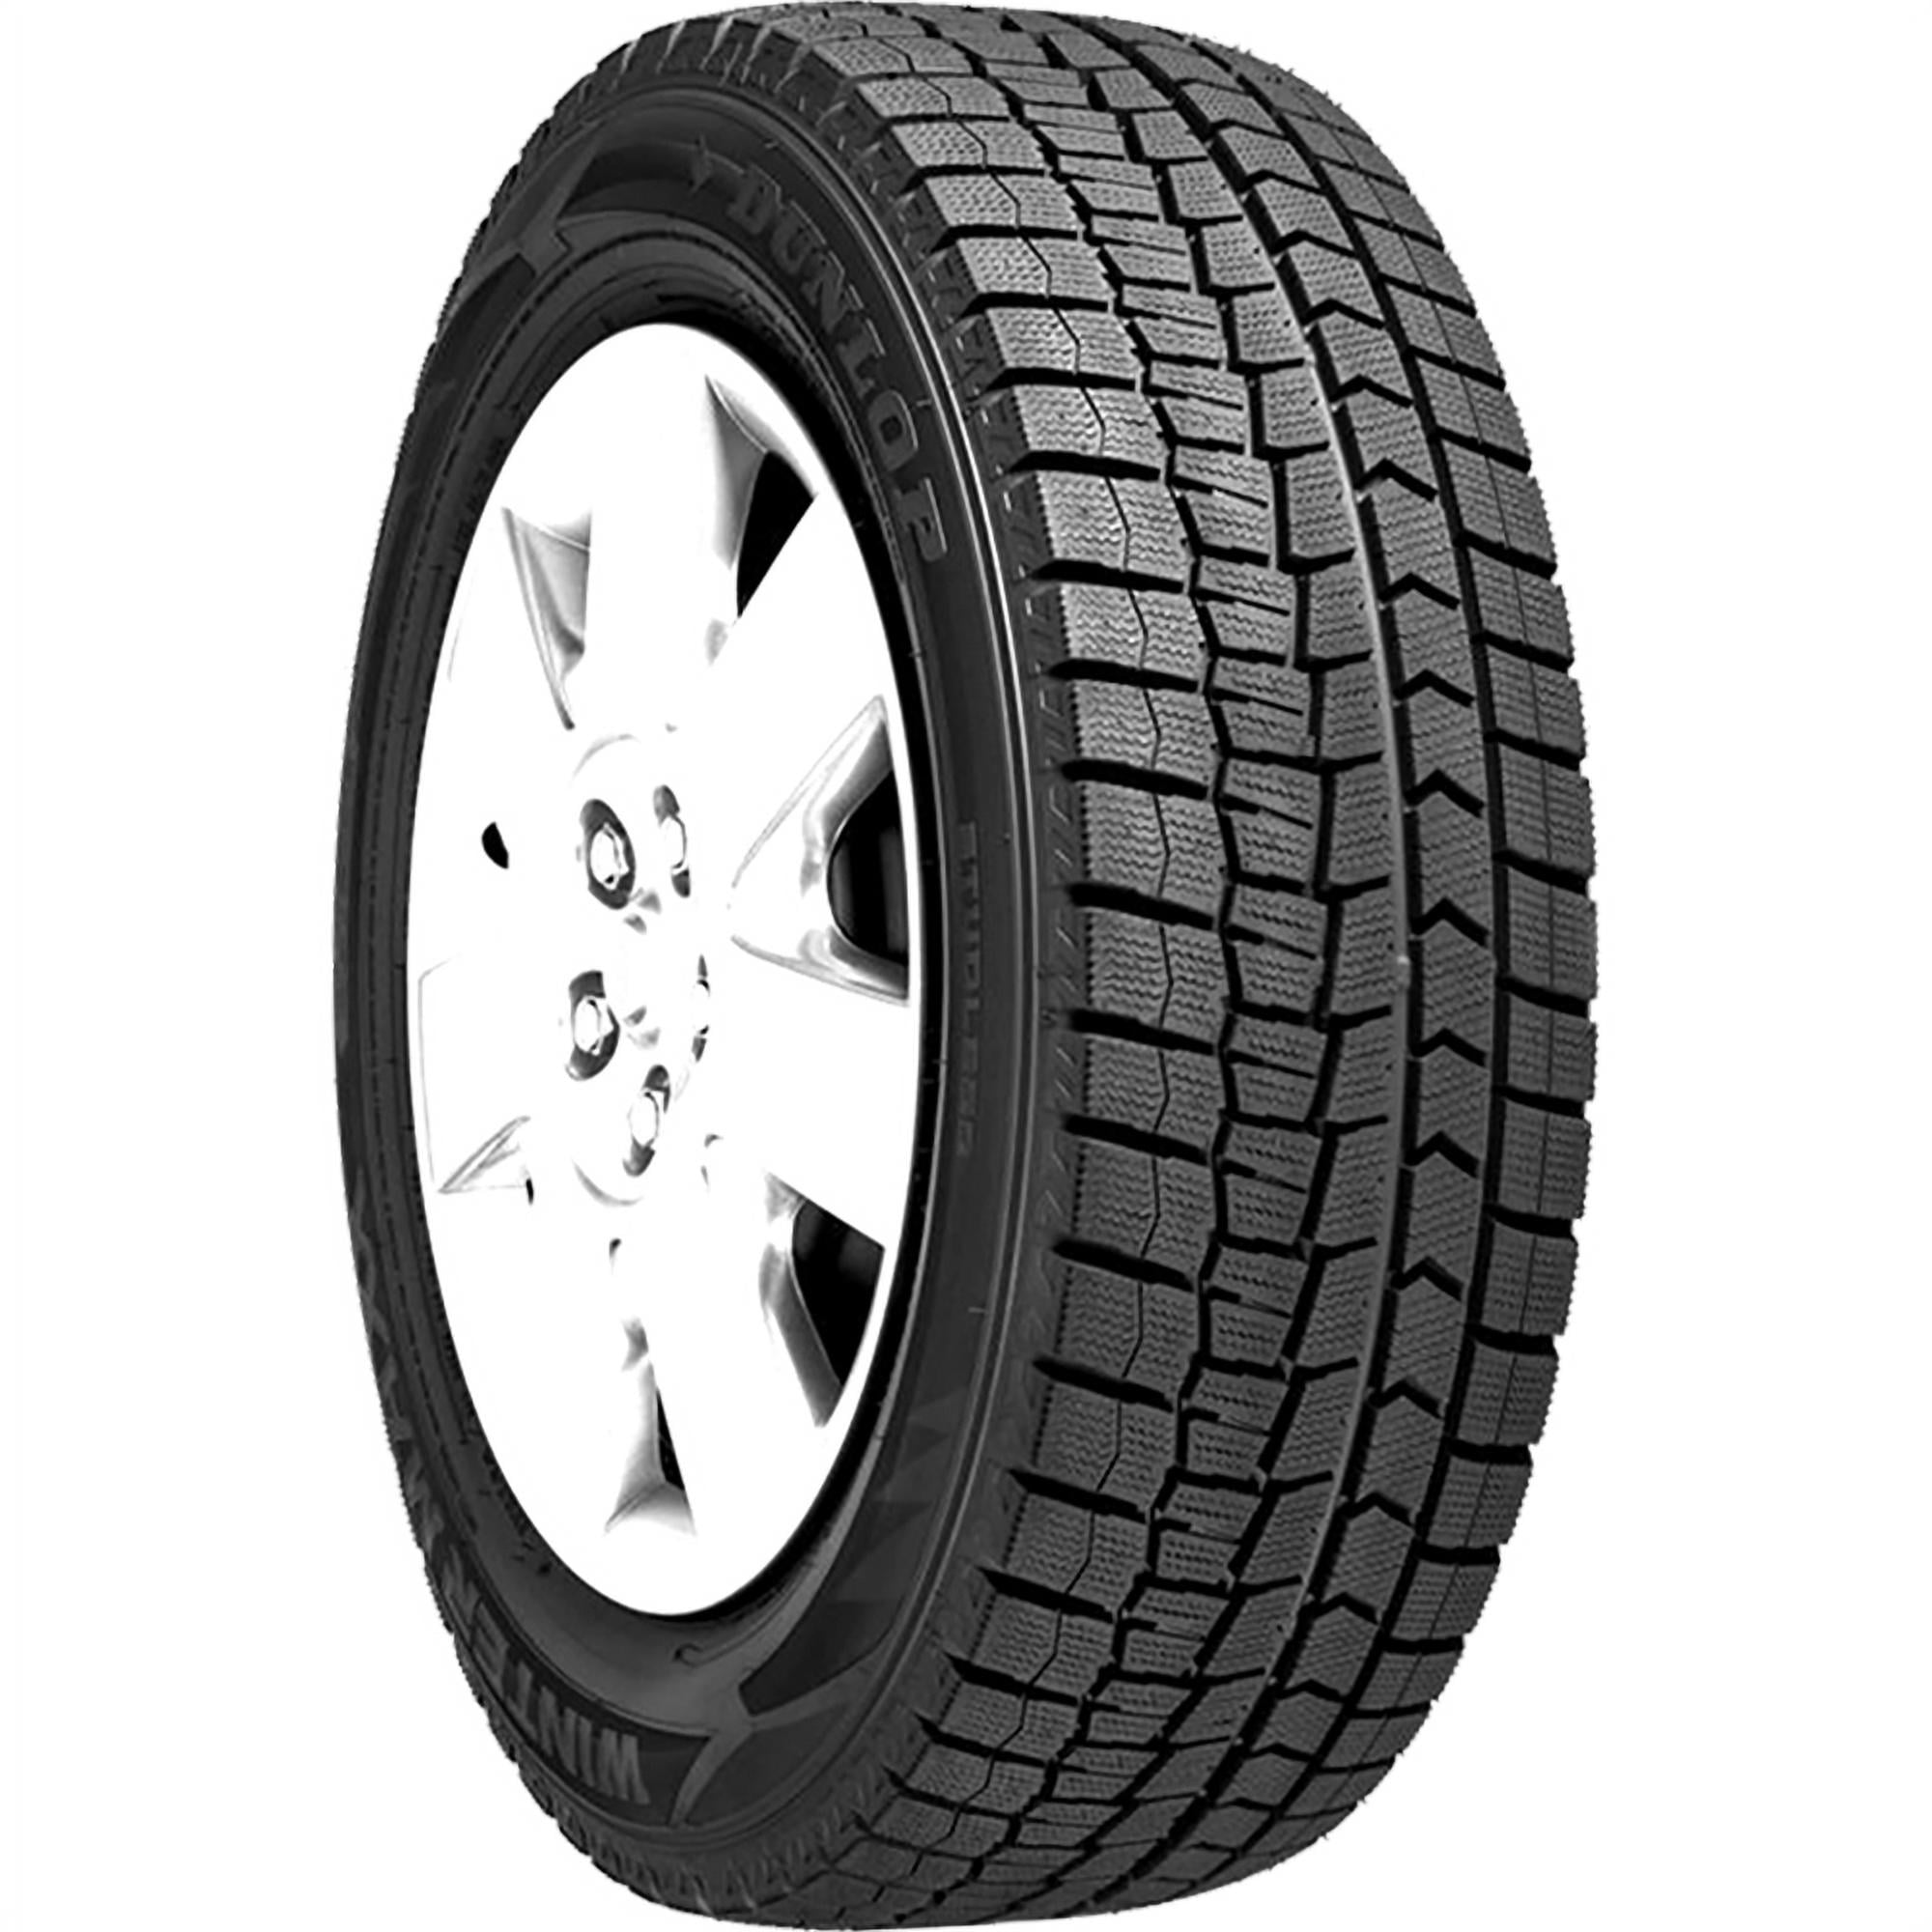 One New Dunlop Winter Maxx 2 175/70R14 84T (Studless) Snow Tire 